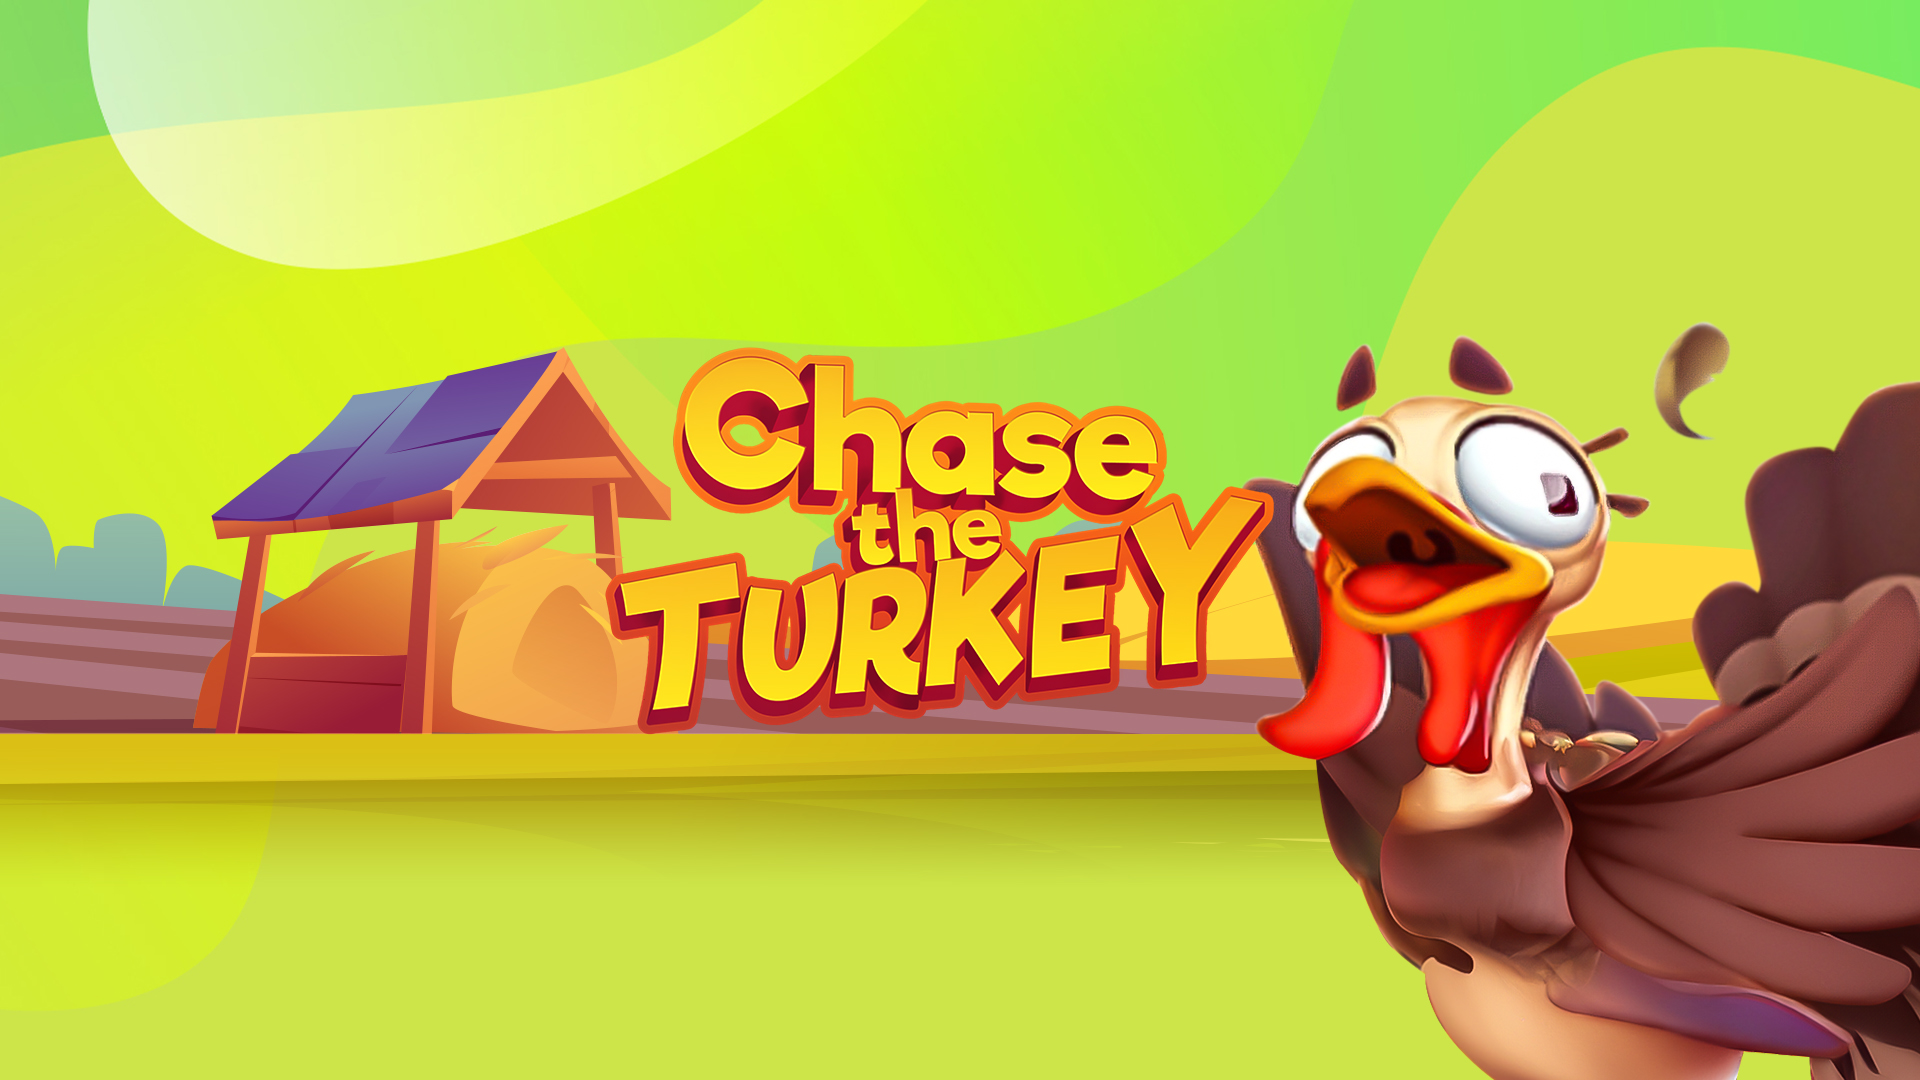 Cartoon turkey stands next to large text that reads ‘Chase the Turkey’, set against a green farming background.